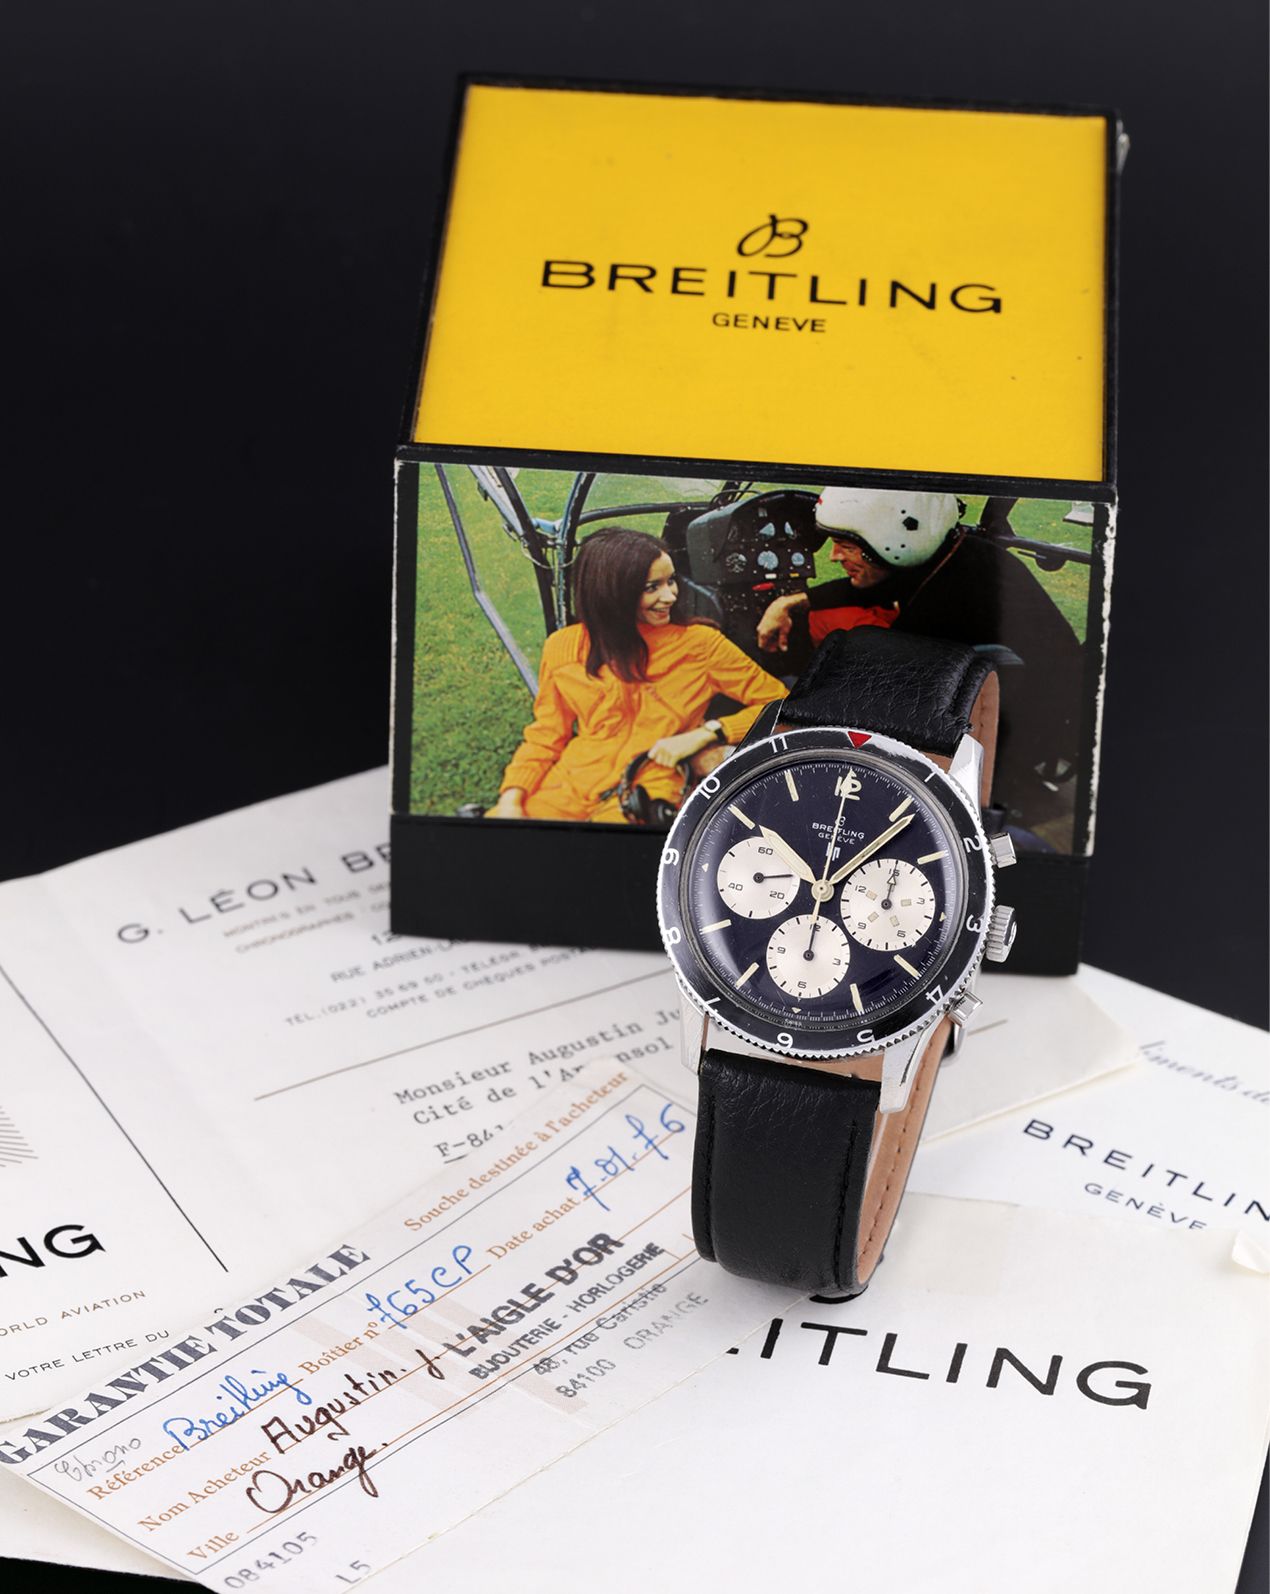 BREITLING - LIP Breitling, Co-Pilot, retailed by LIP, Ref. AVI 765 CP, case no. &hellip;